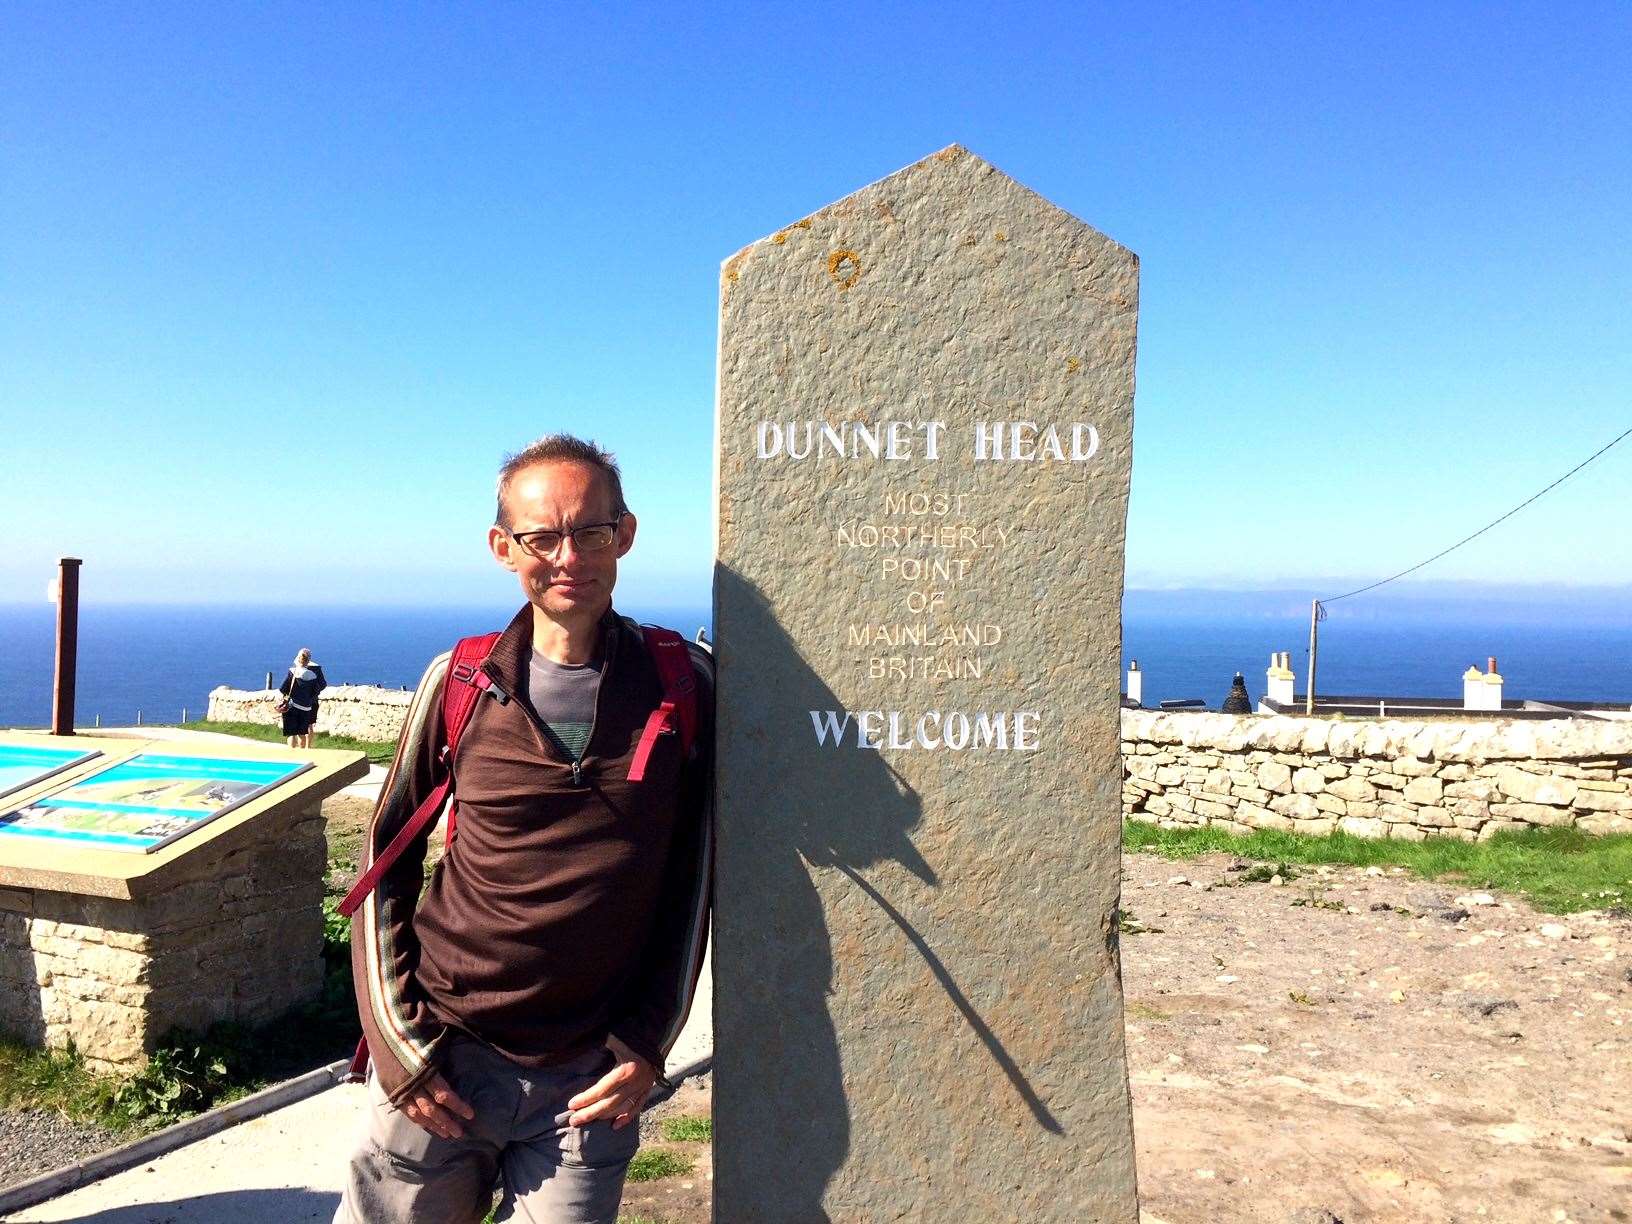 Rob Pickard's main aim was to complete his walk of a lifetime by reaching Dunnet Head.